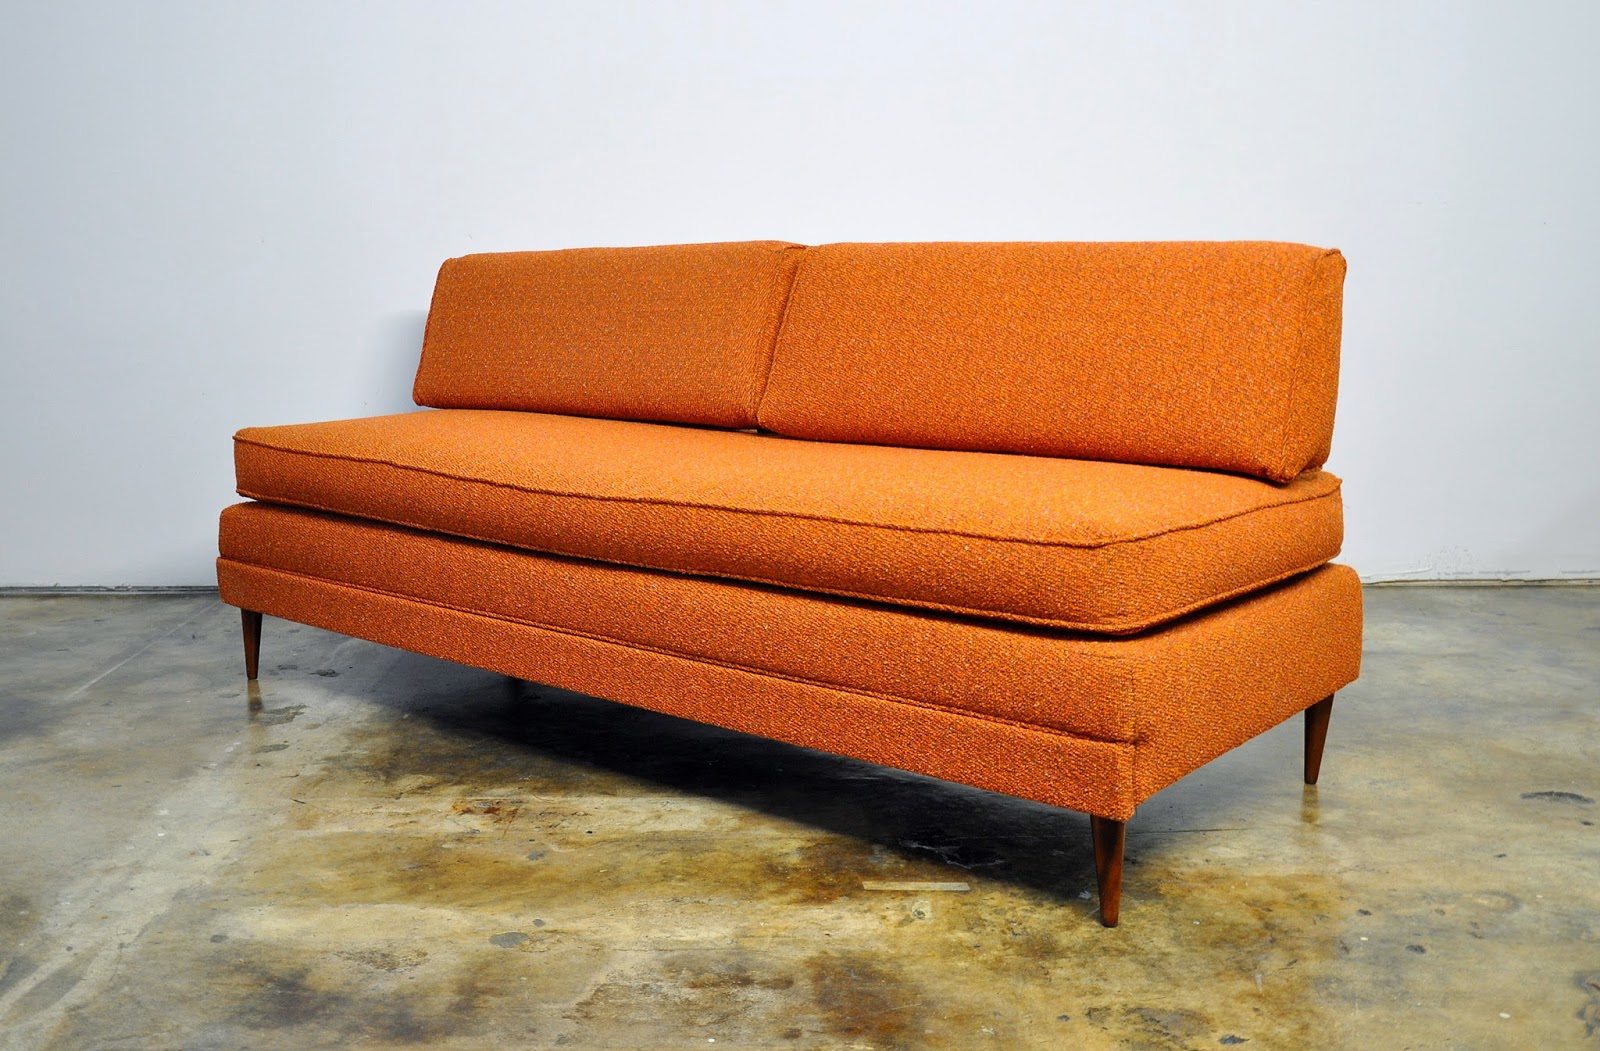 SELECT MODERN Danish Modern Sofa or Daybed with Trundle